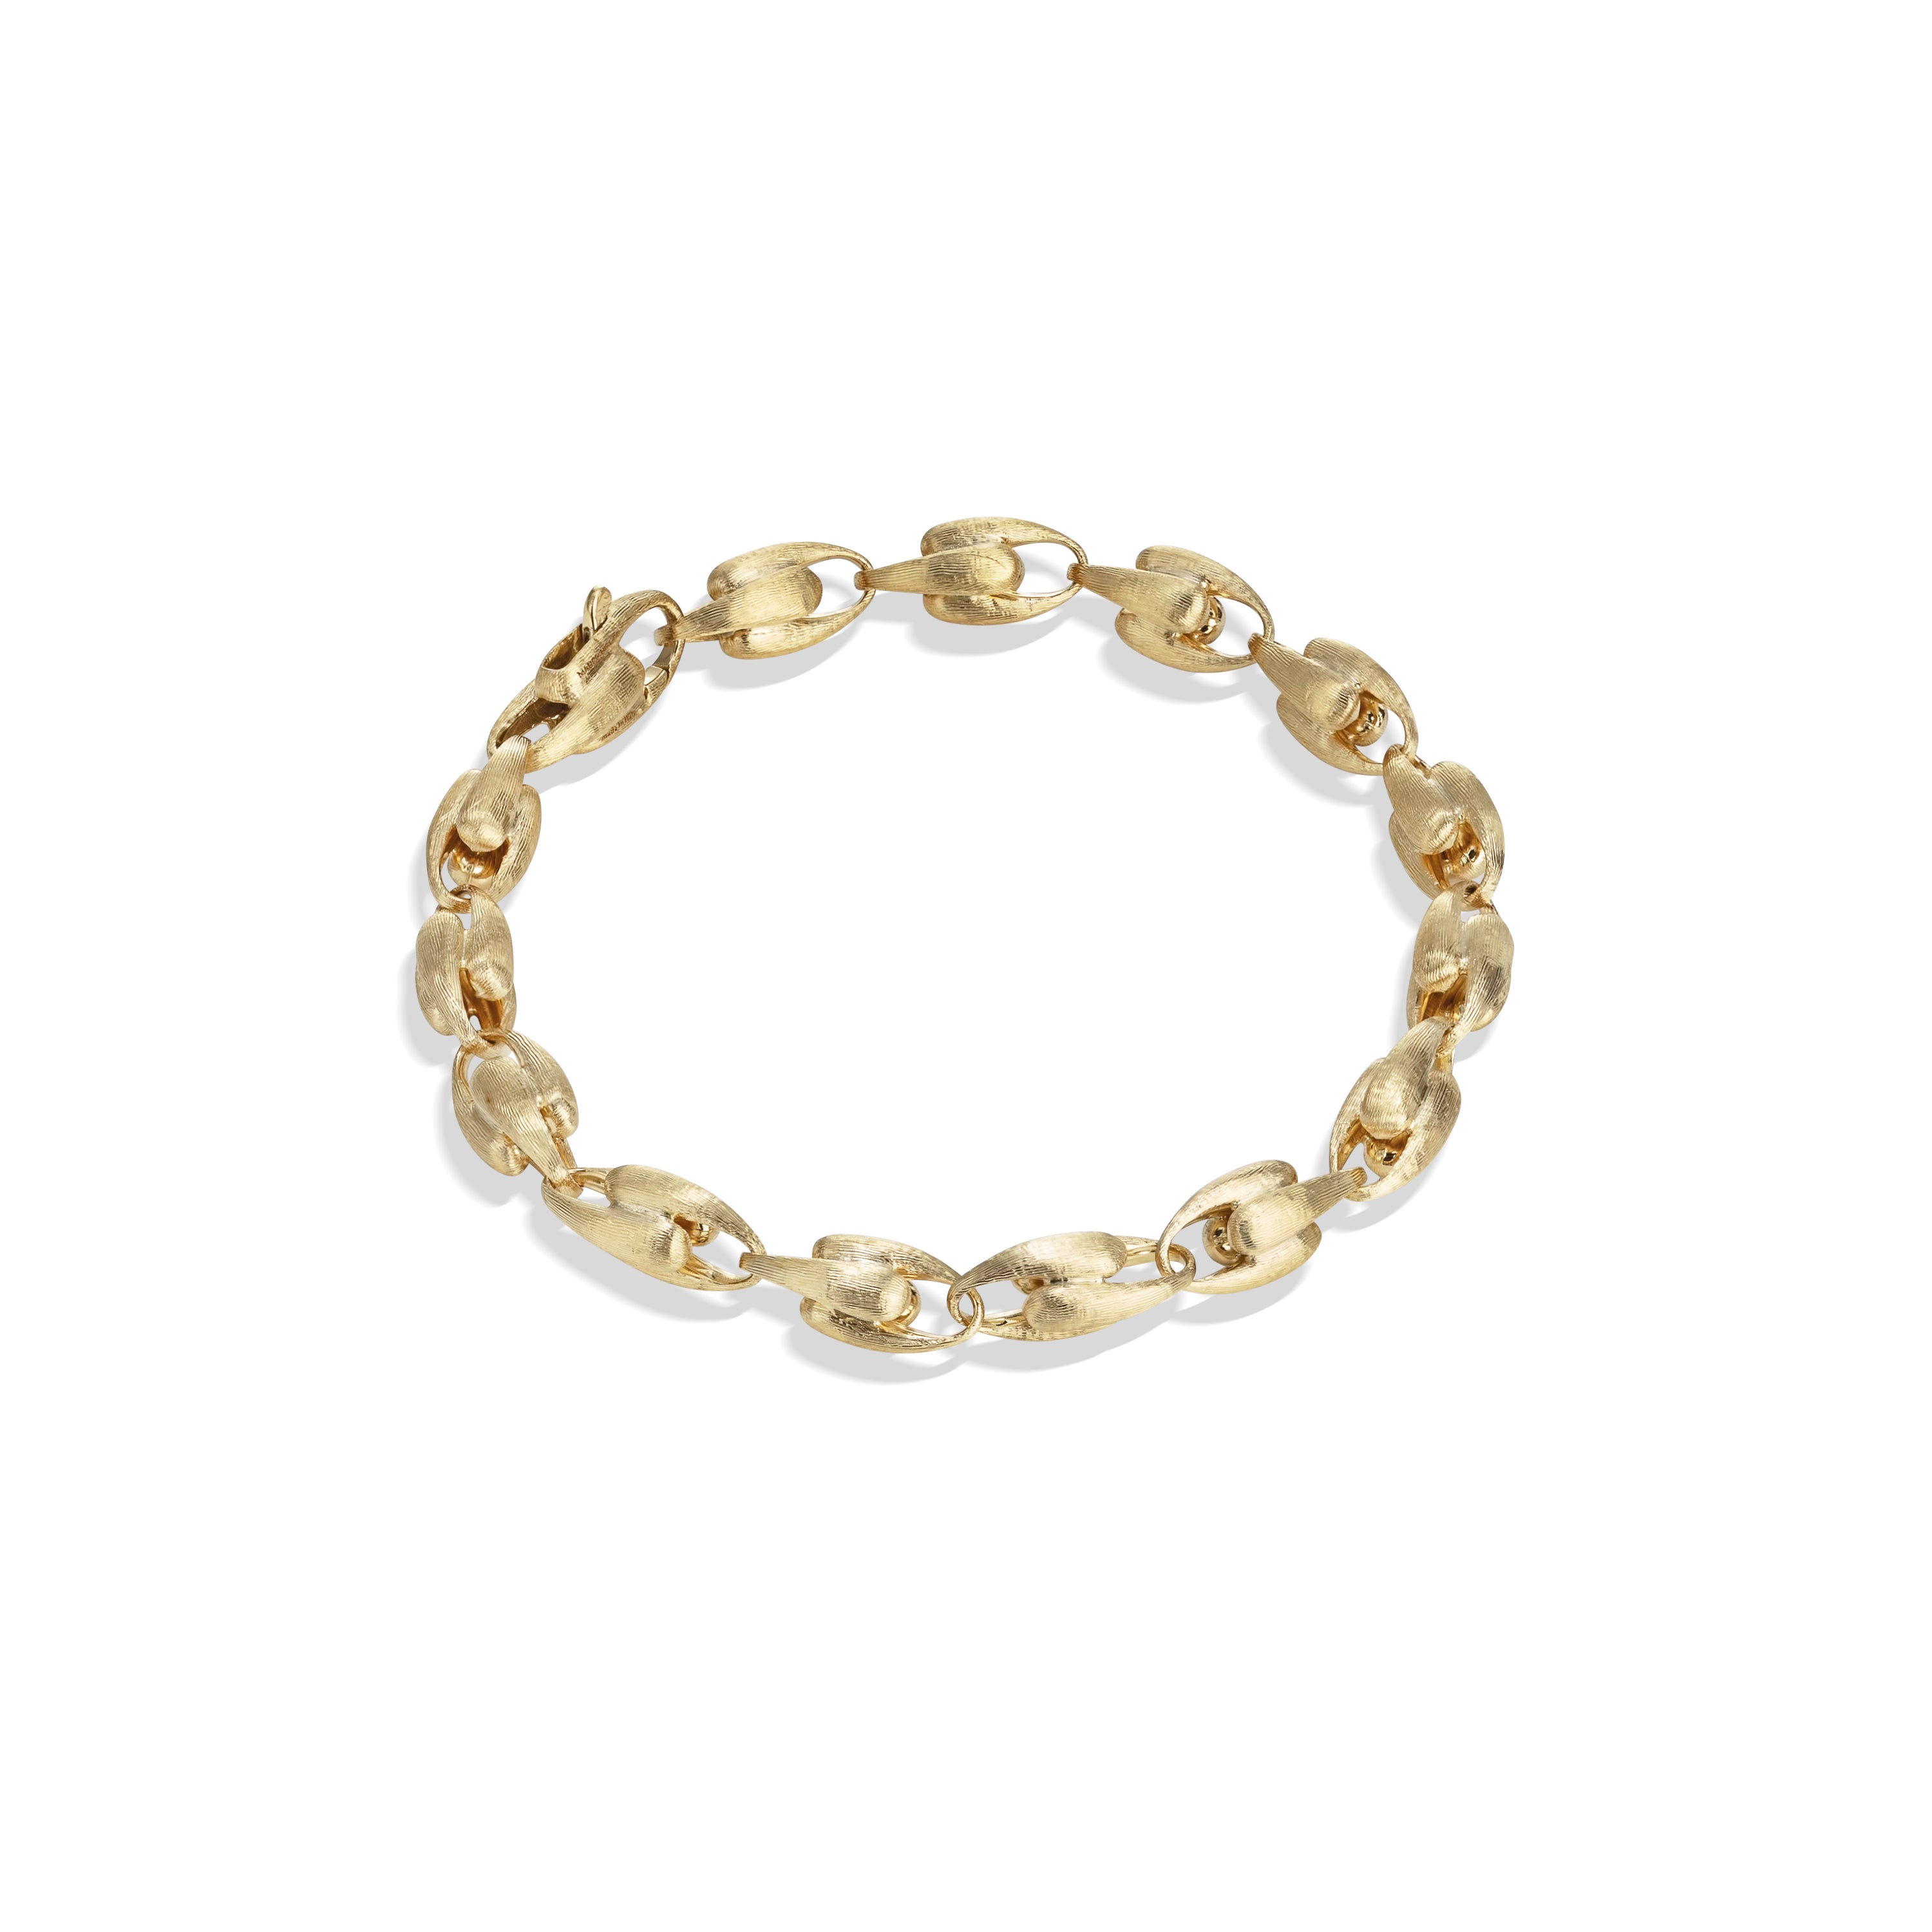 MARCO BICEGO LUCIA COLLECTION 18K YELLOW GOLD SMALL LINK BRACELET